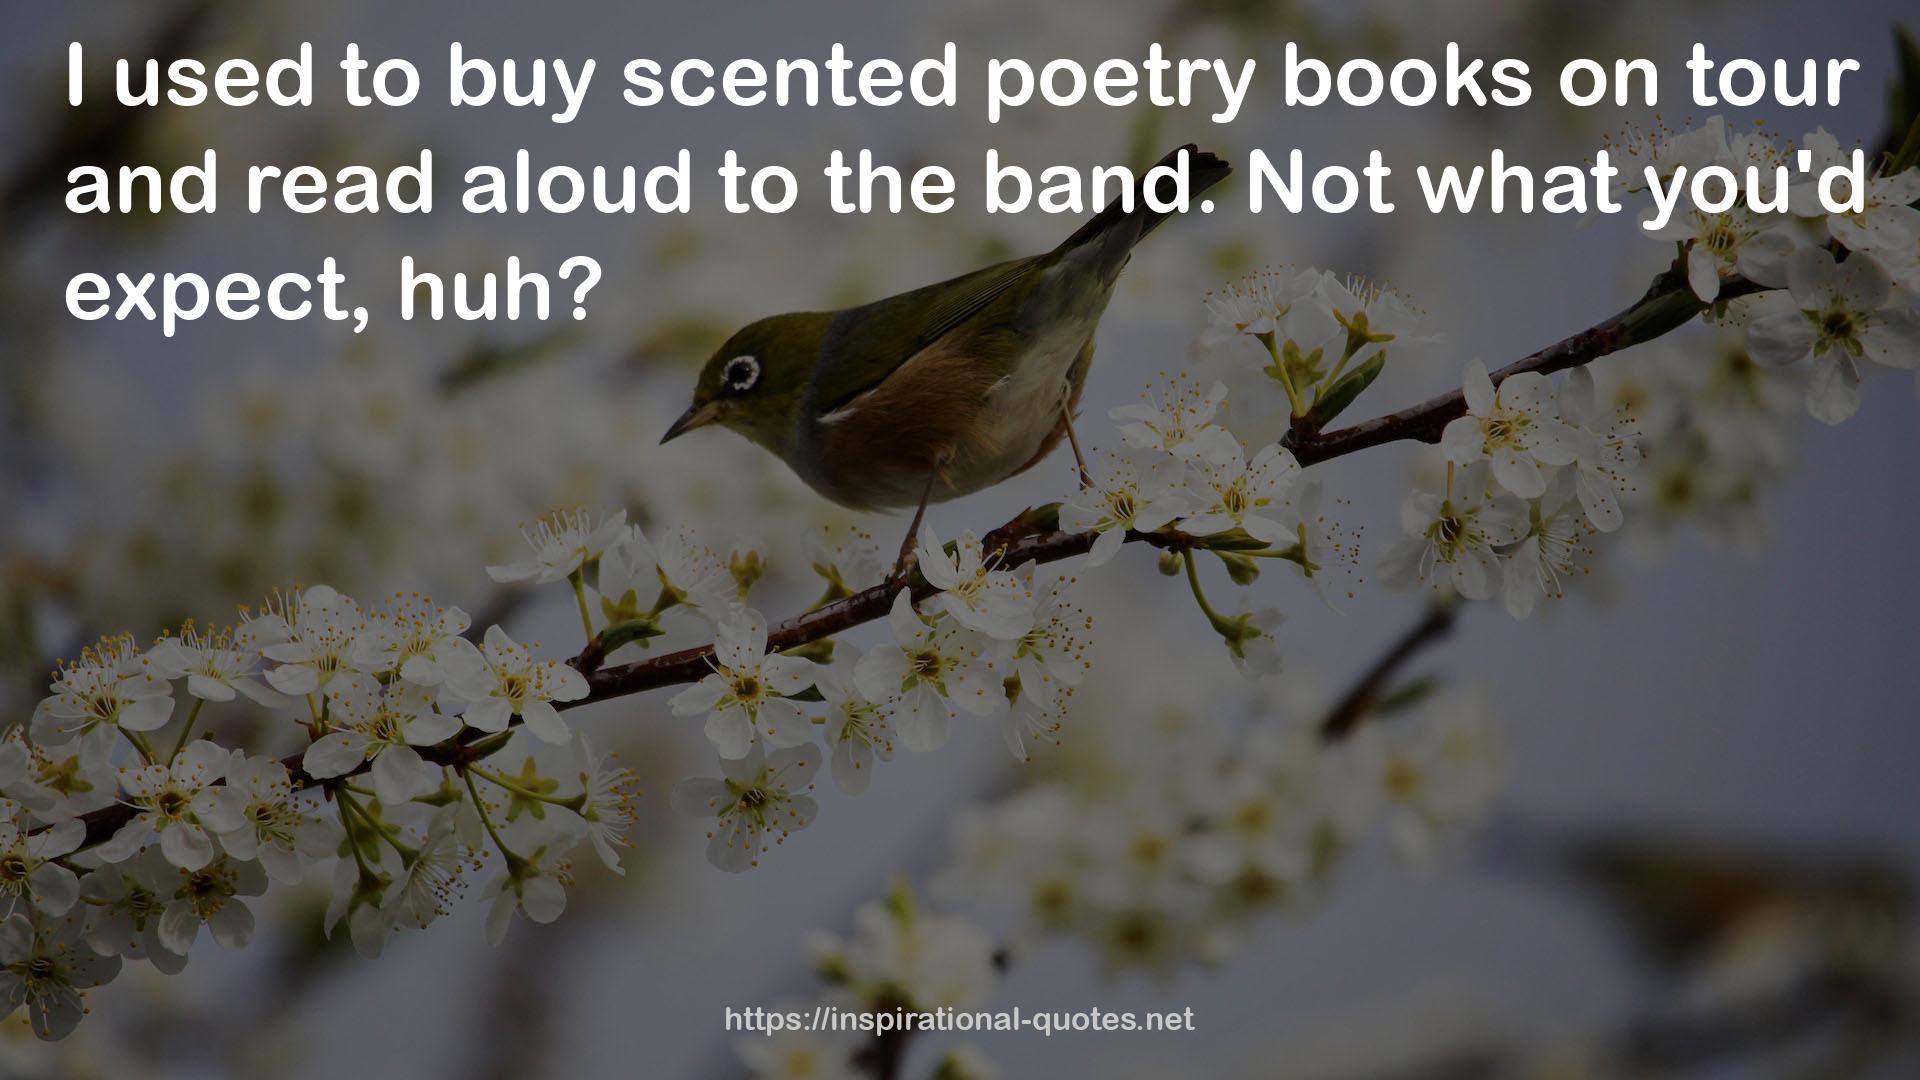 scented poetry books  QUOTES